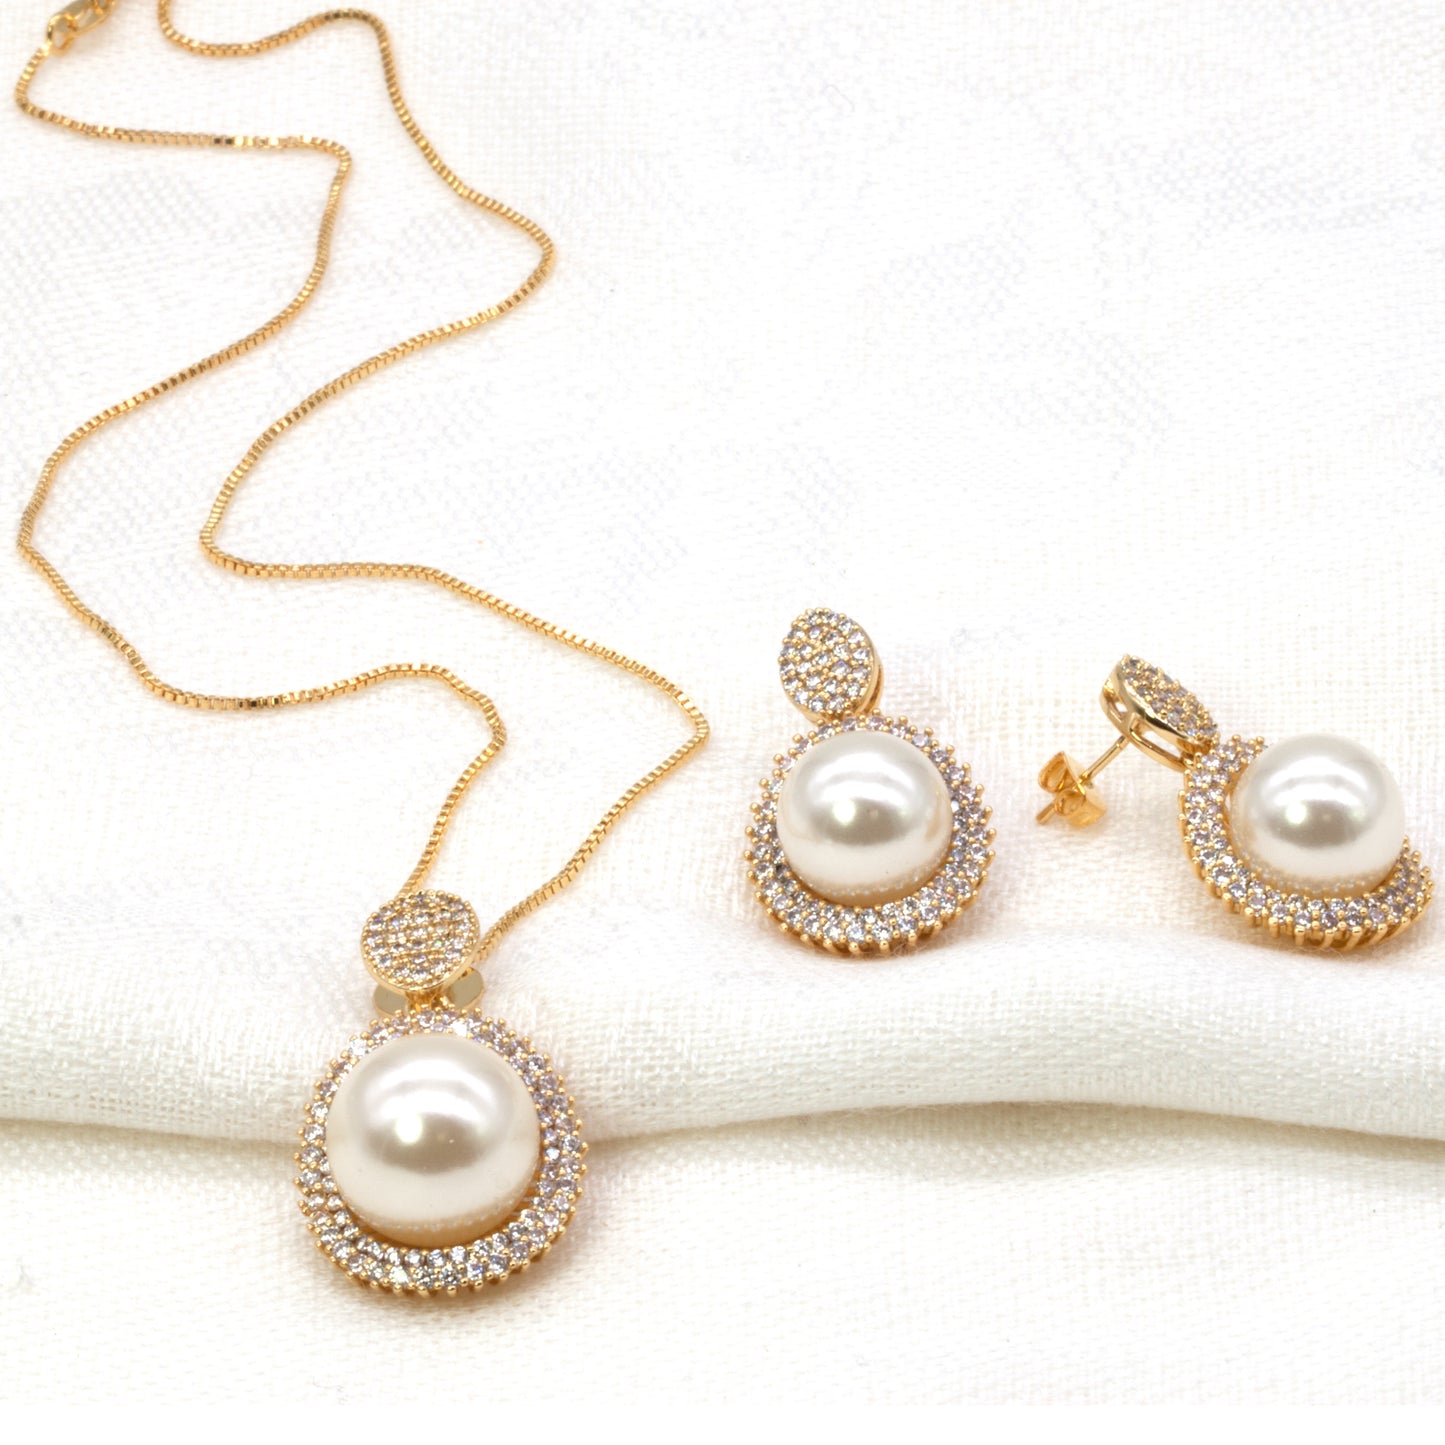 Pearl Pendant Necklace with AAA Cubic Zirconia, Gold Plated (Necklace Only)